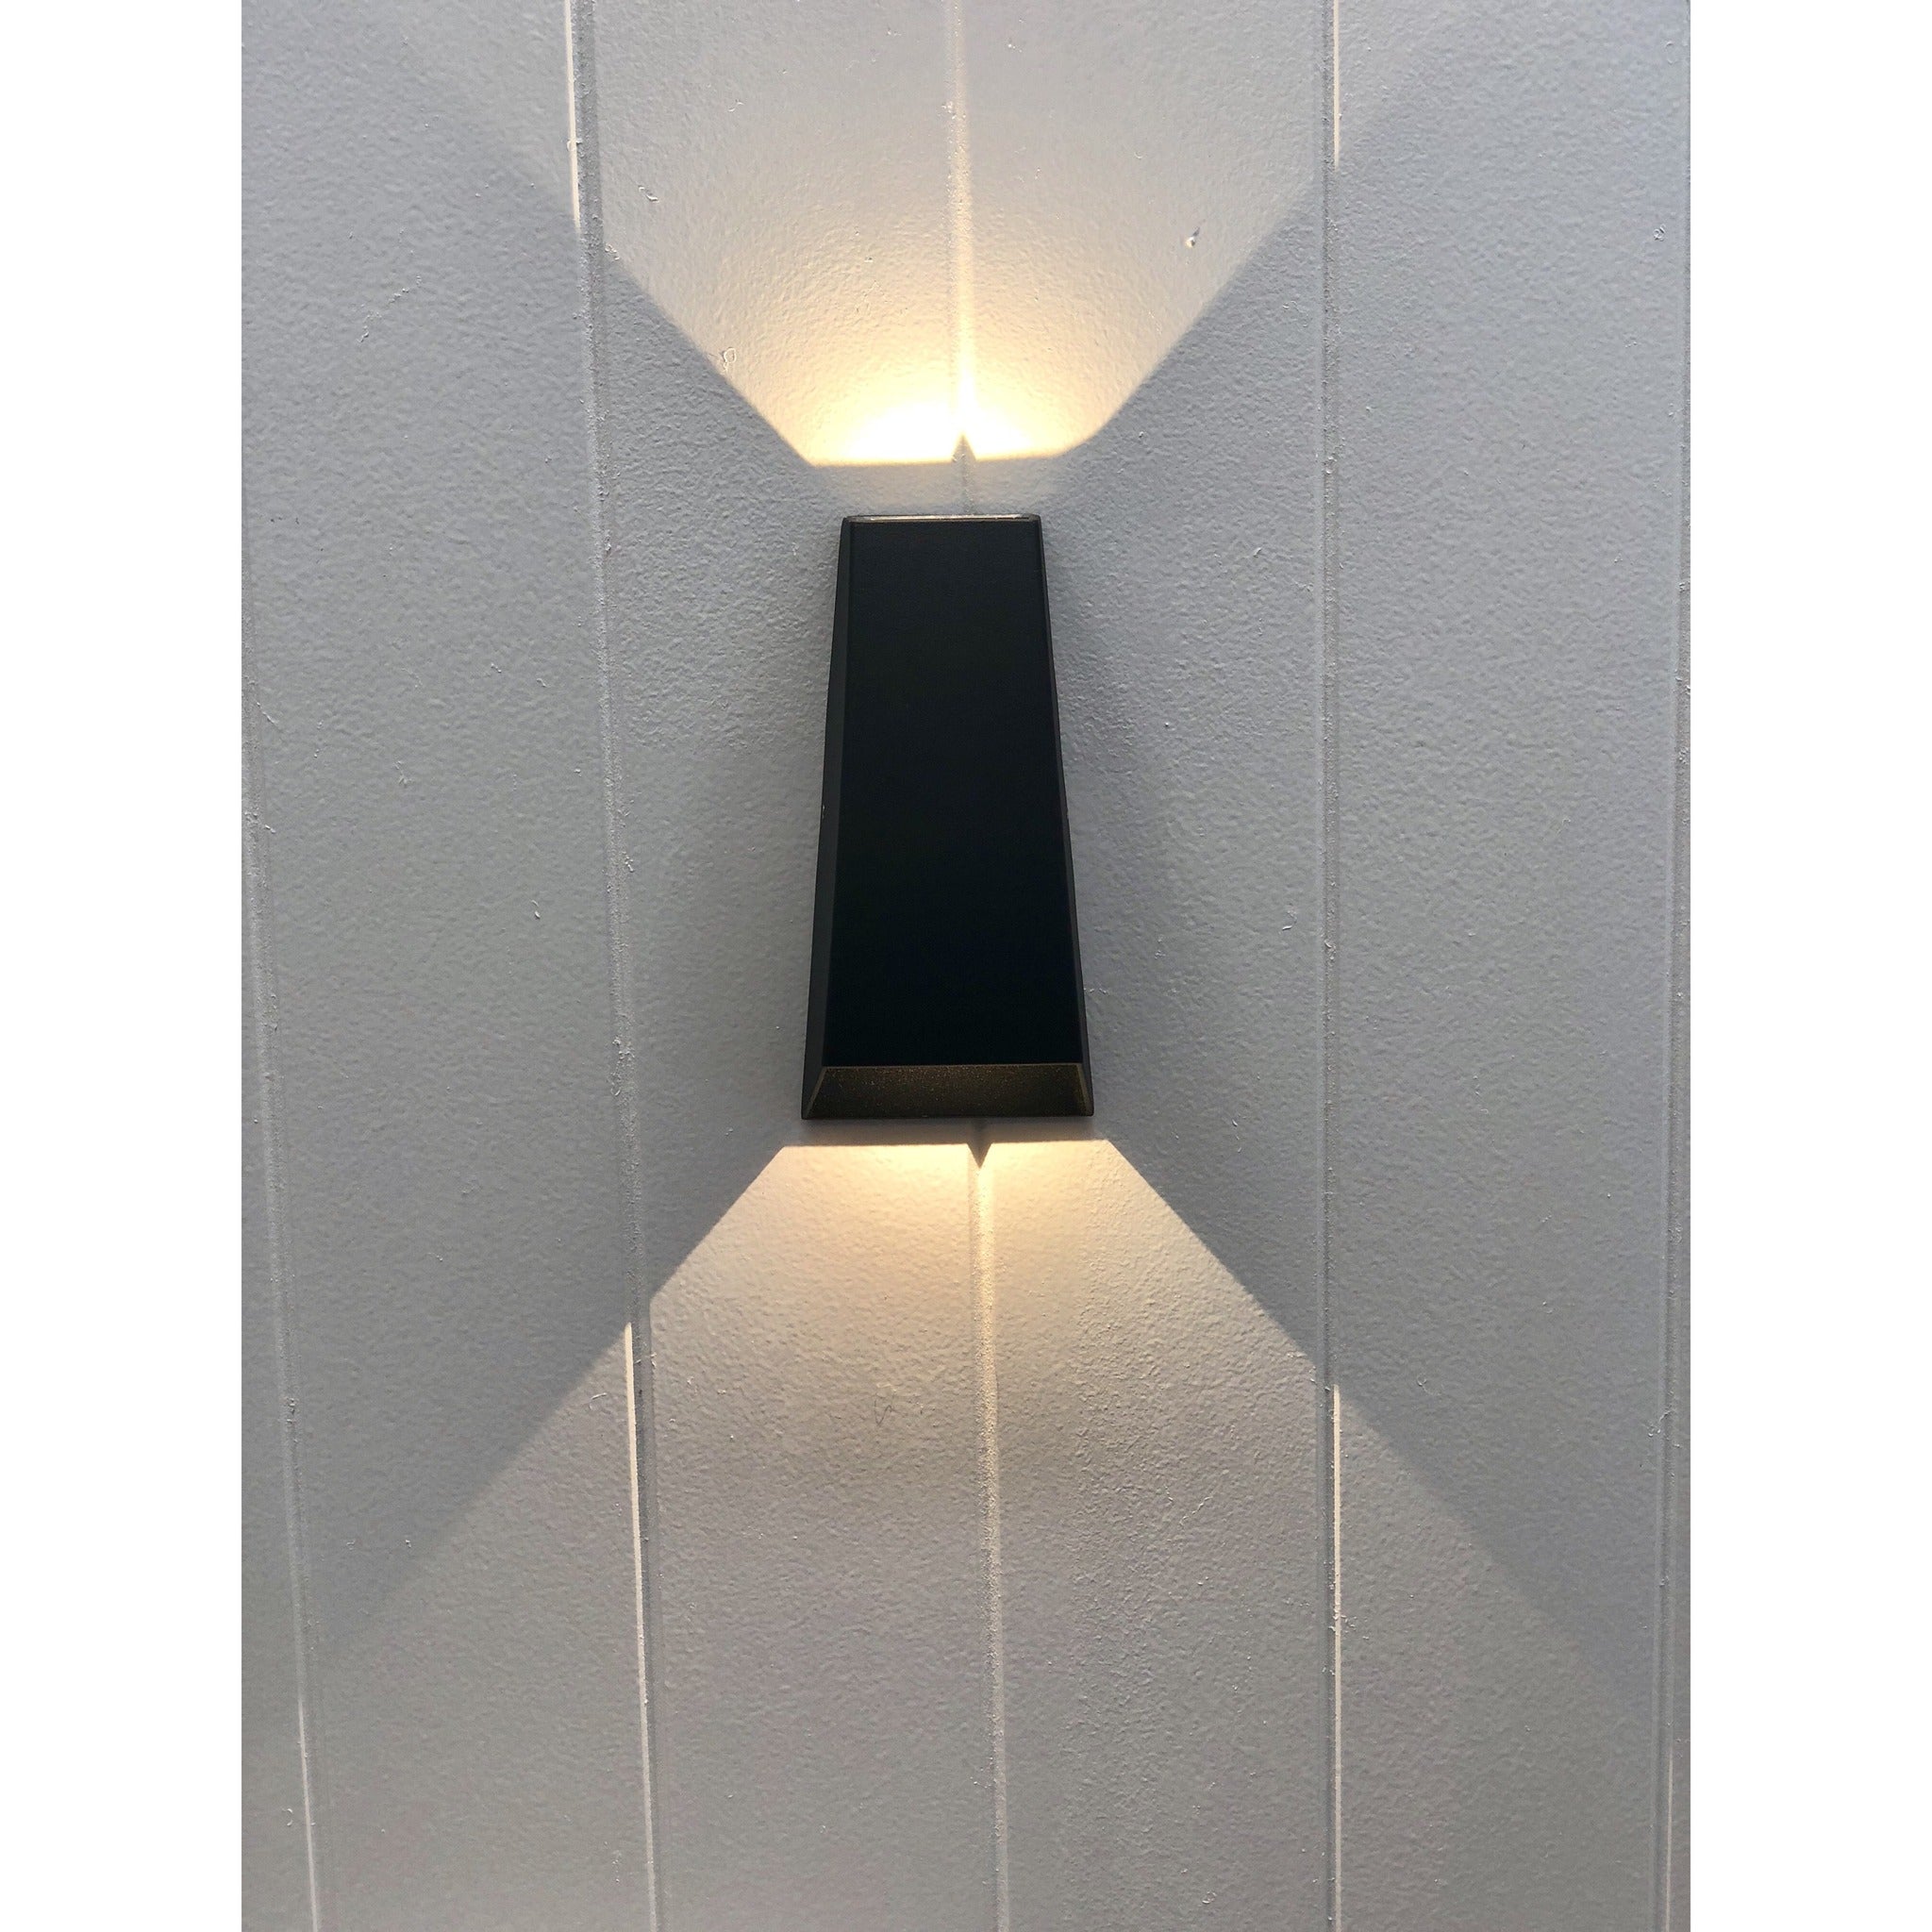 The Trapeze - Up Down Wall Light